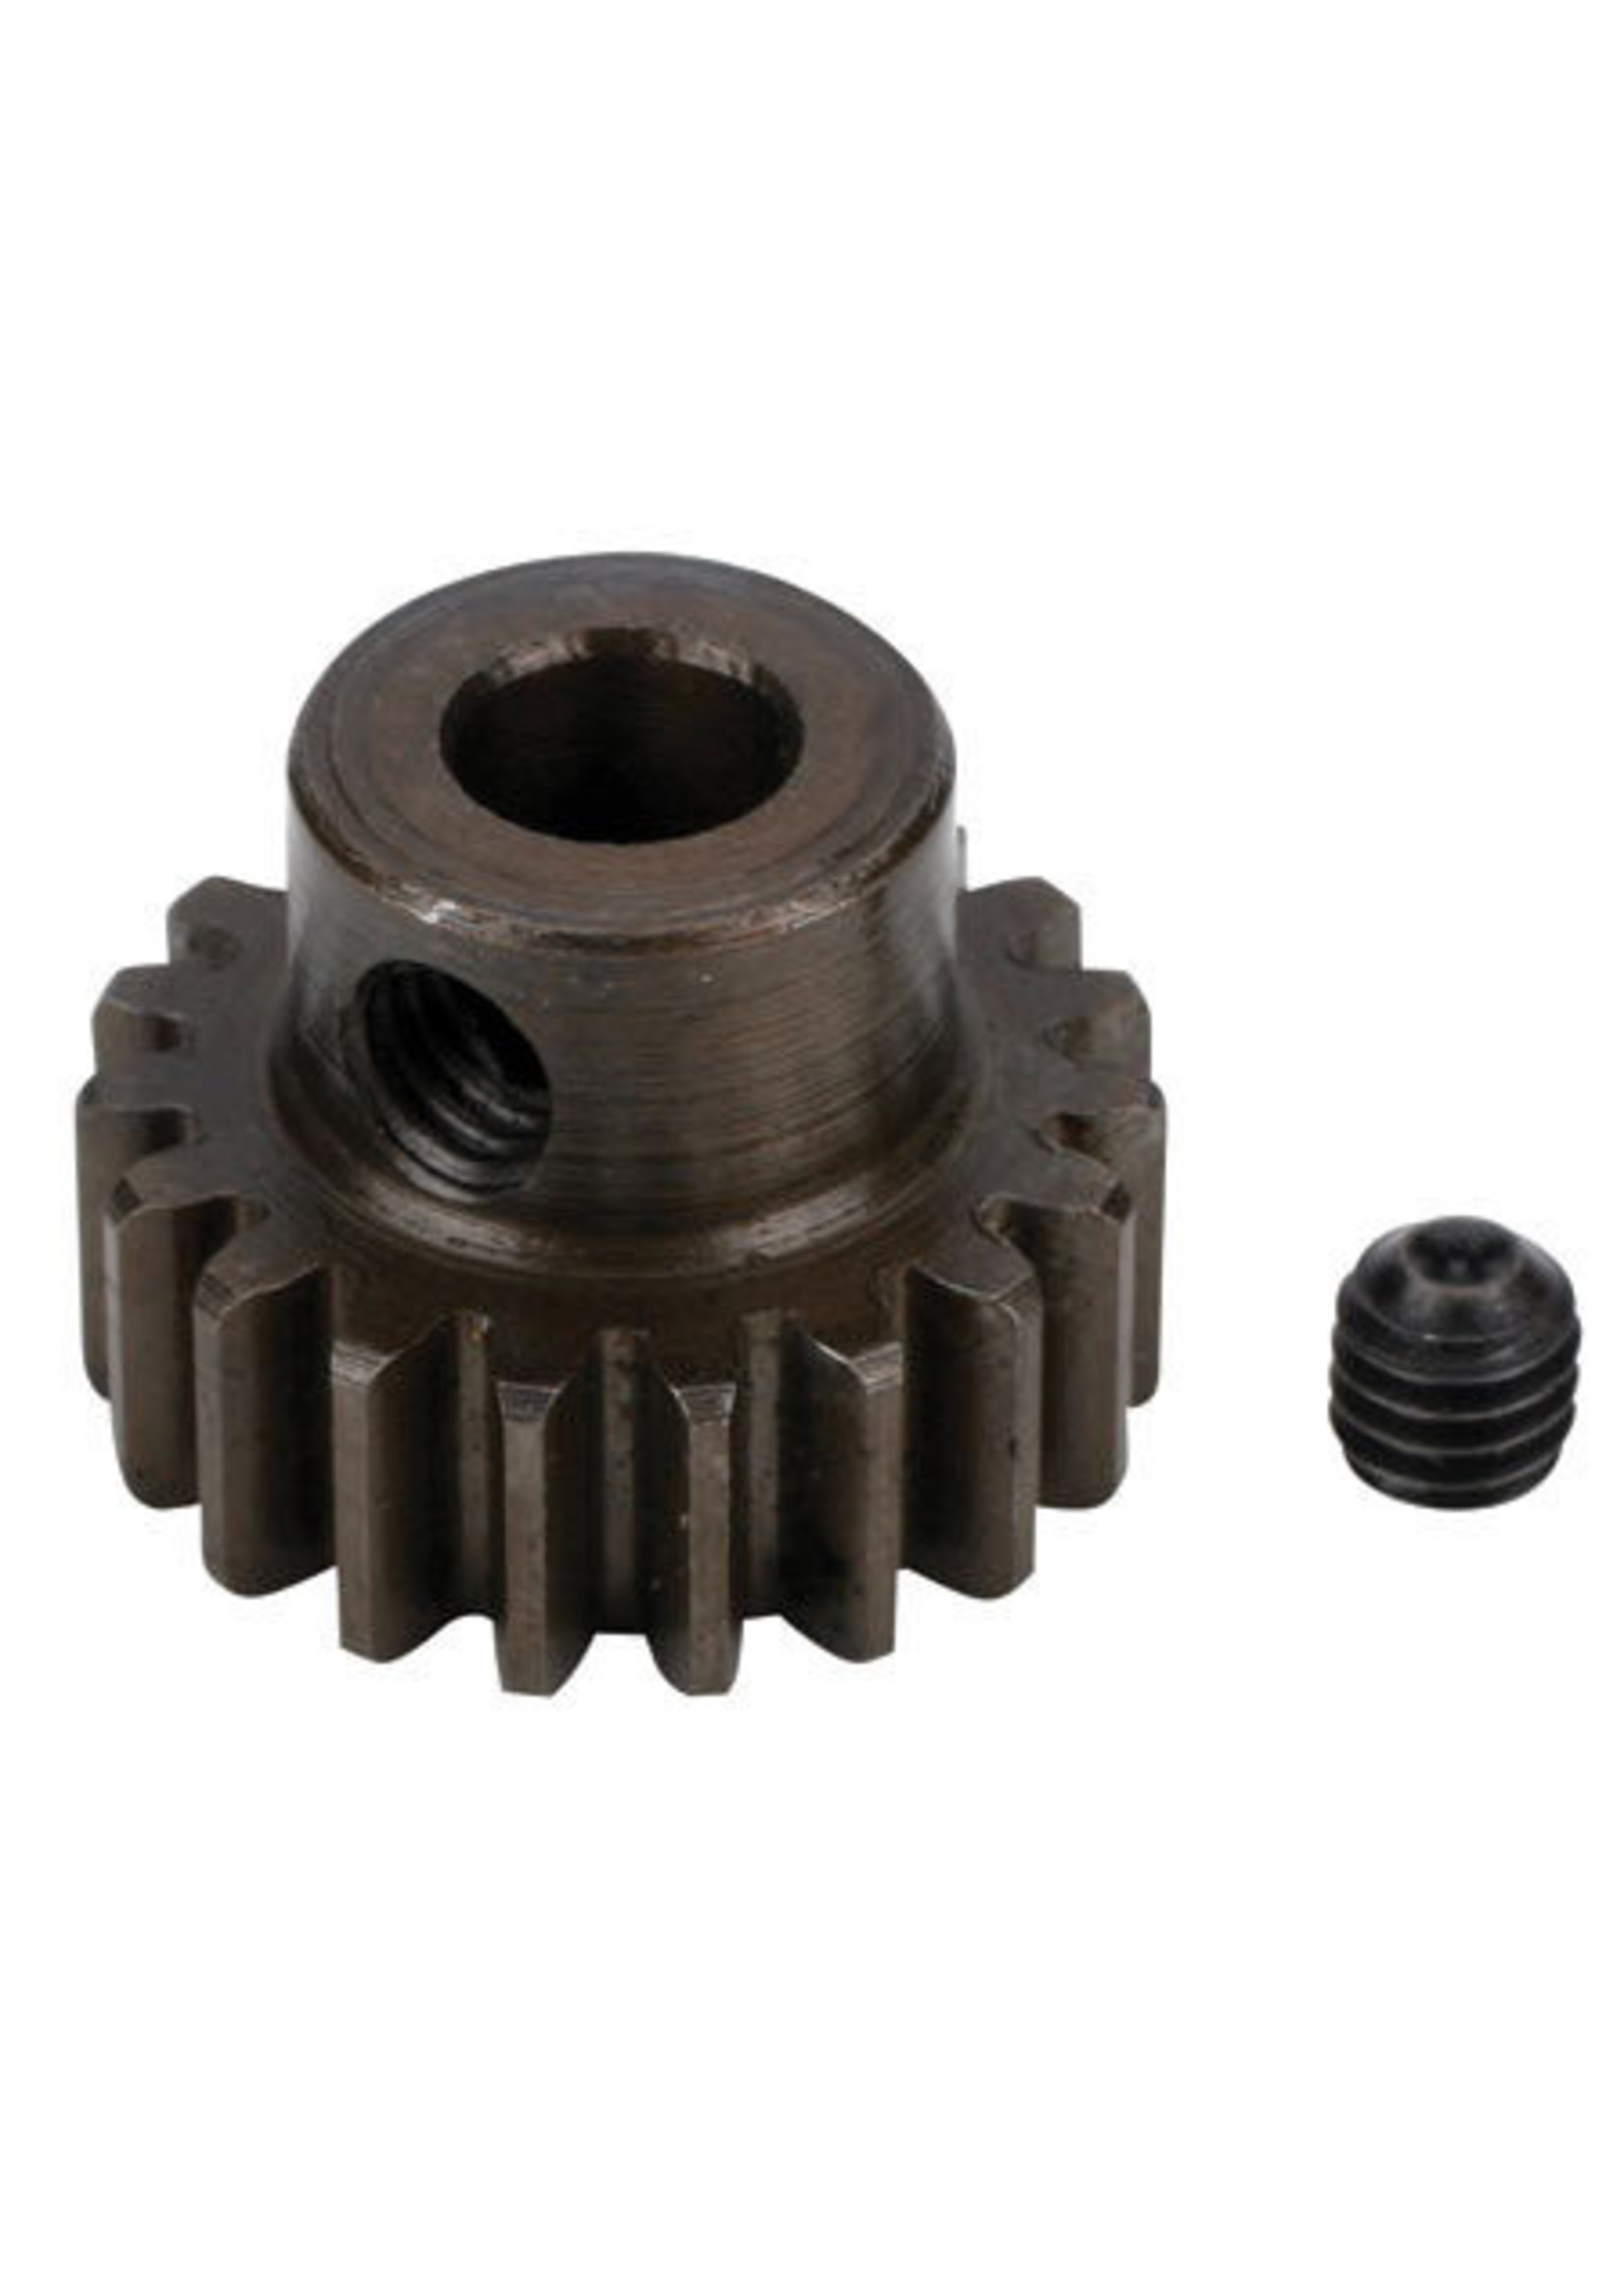 Robinson Racing Products RRP8721 Robinson Racing Products Extra Hard Steel .8 Mod Pinion Gear w/5mm Bore (21T)